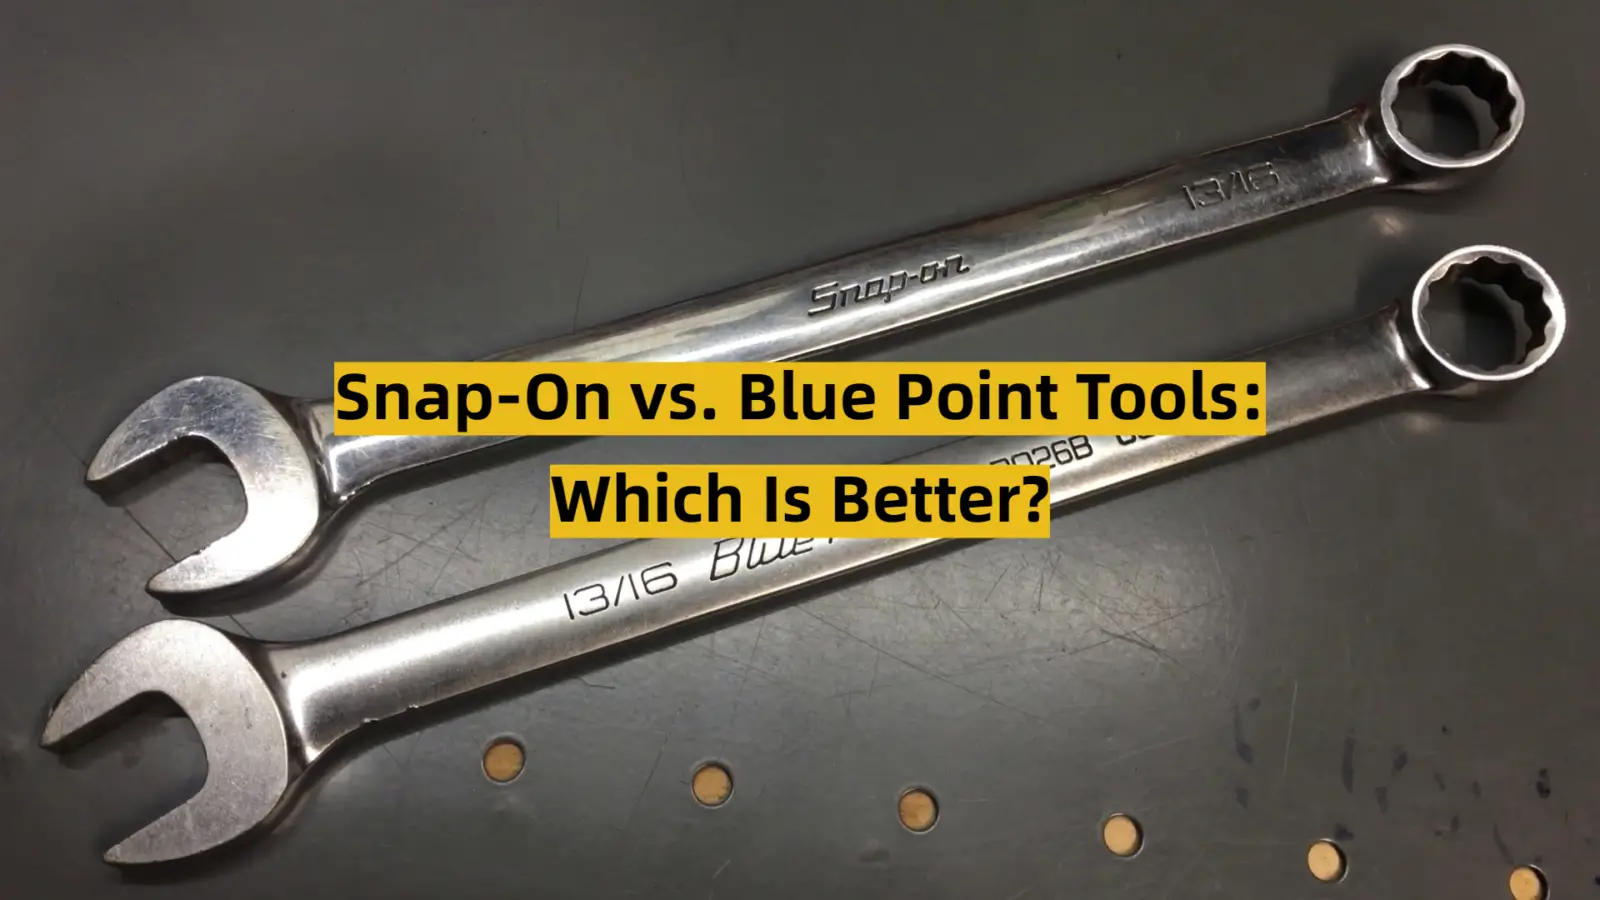 Snap-On vs. Blue Point Tools: Which Is Better?